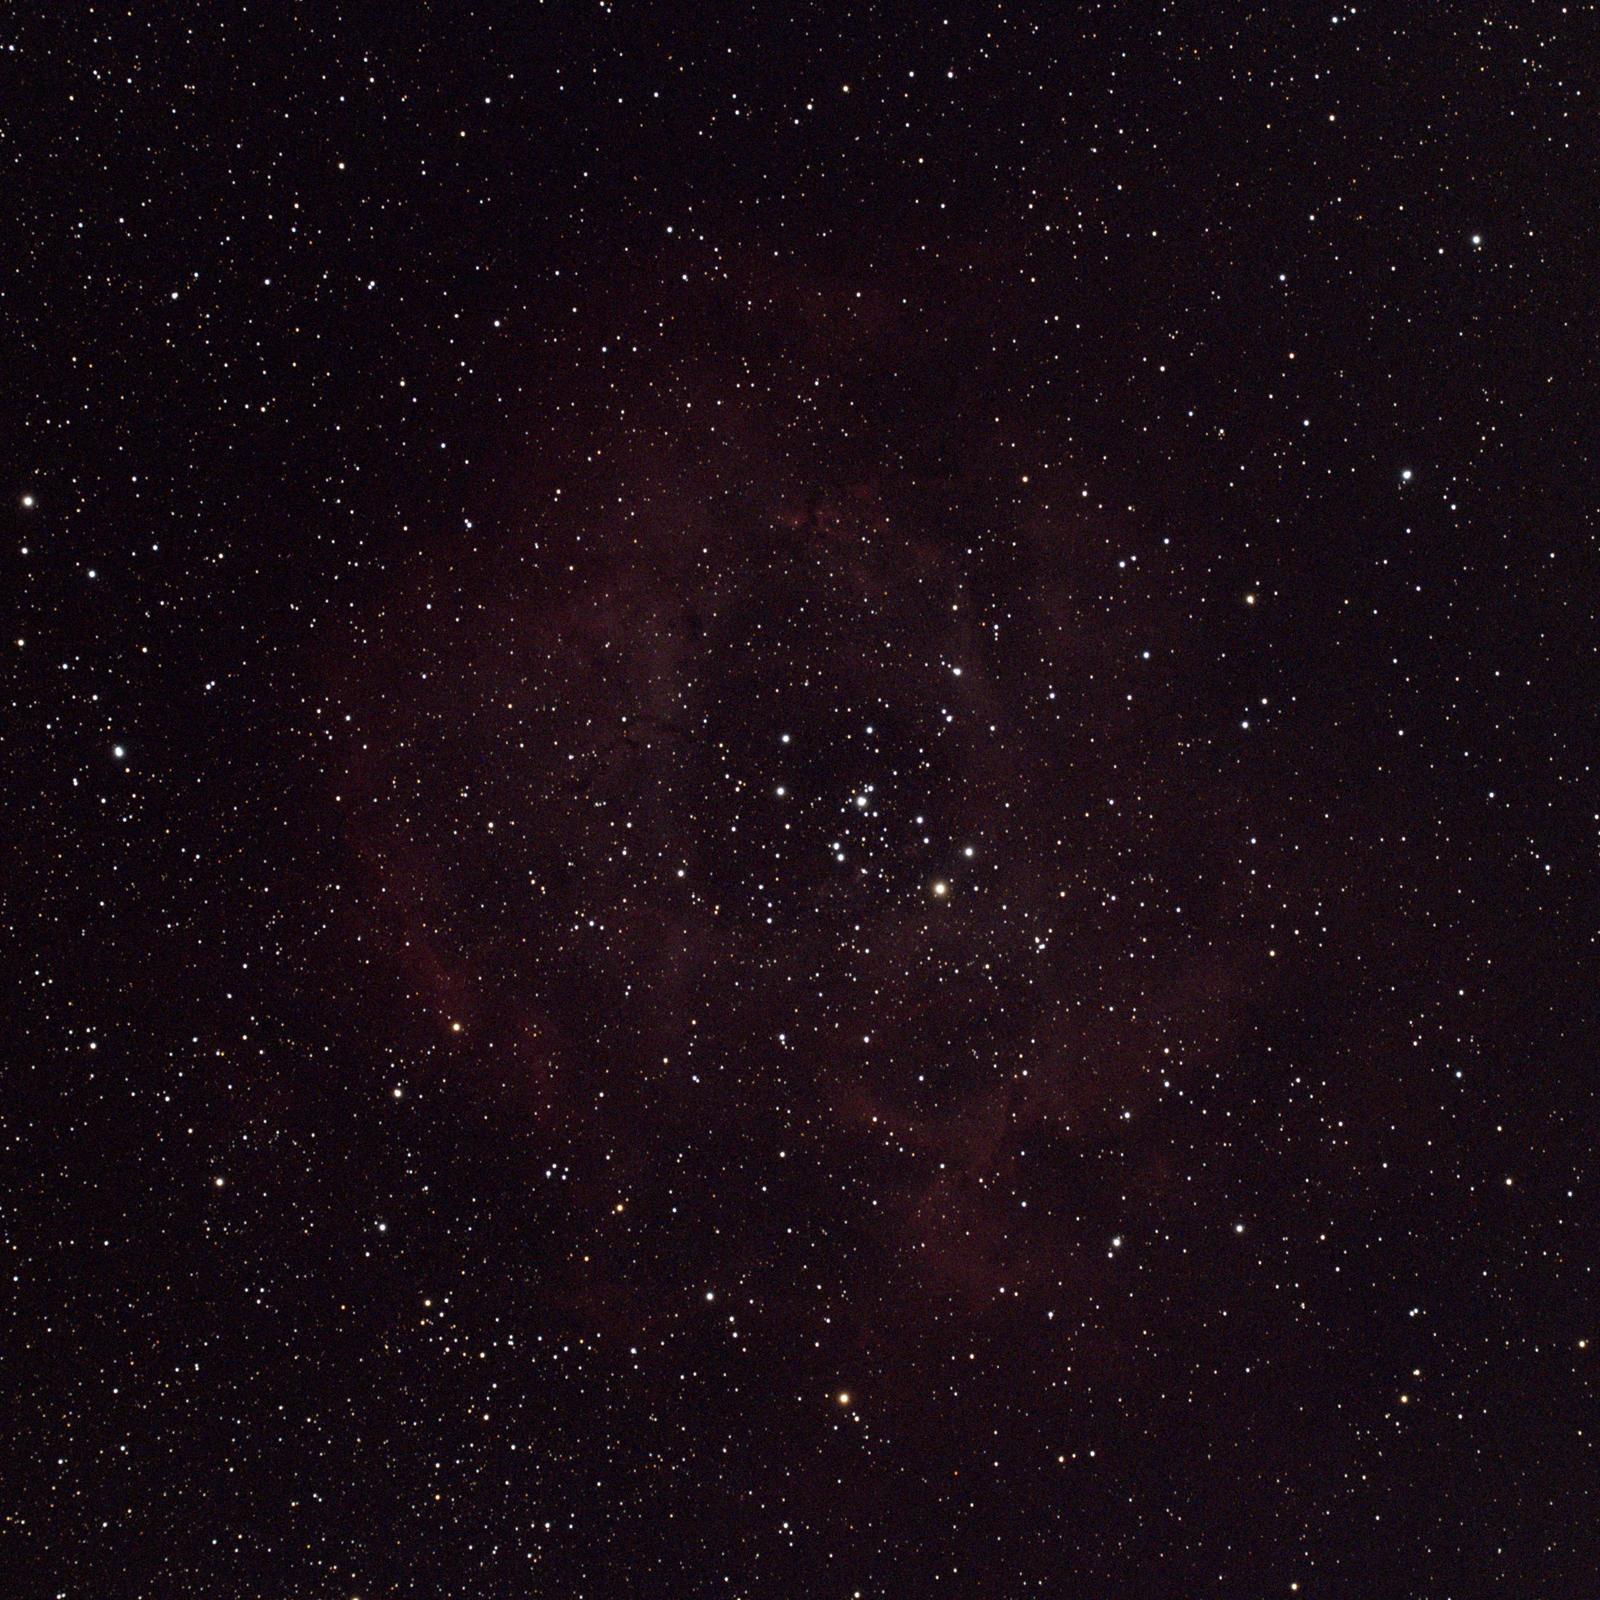 NGC2244 92f5 3 2600 g350 br10 20F 600S NoEdit 12202022m